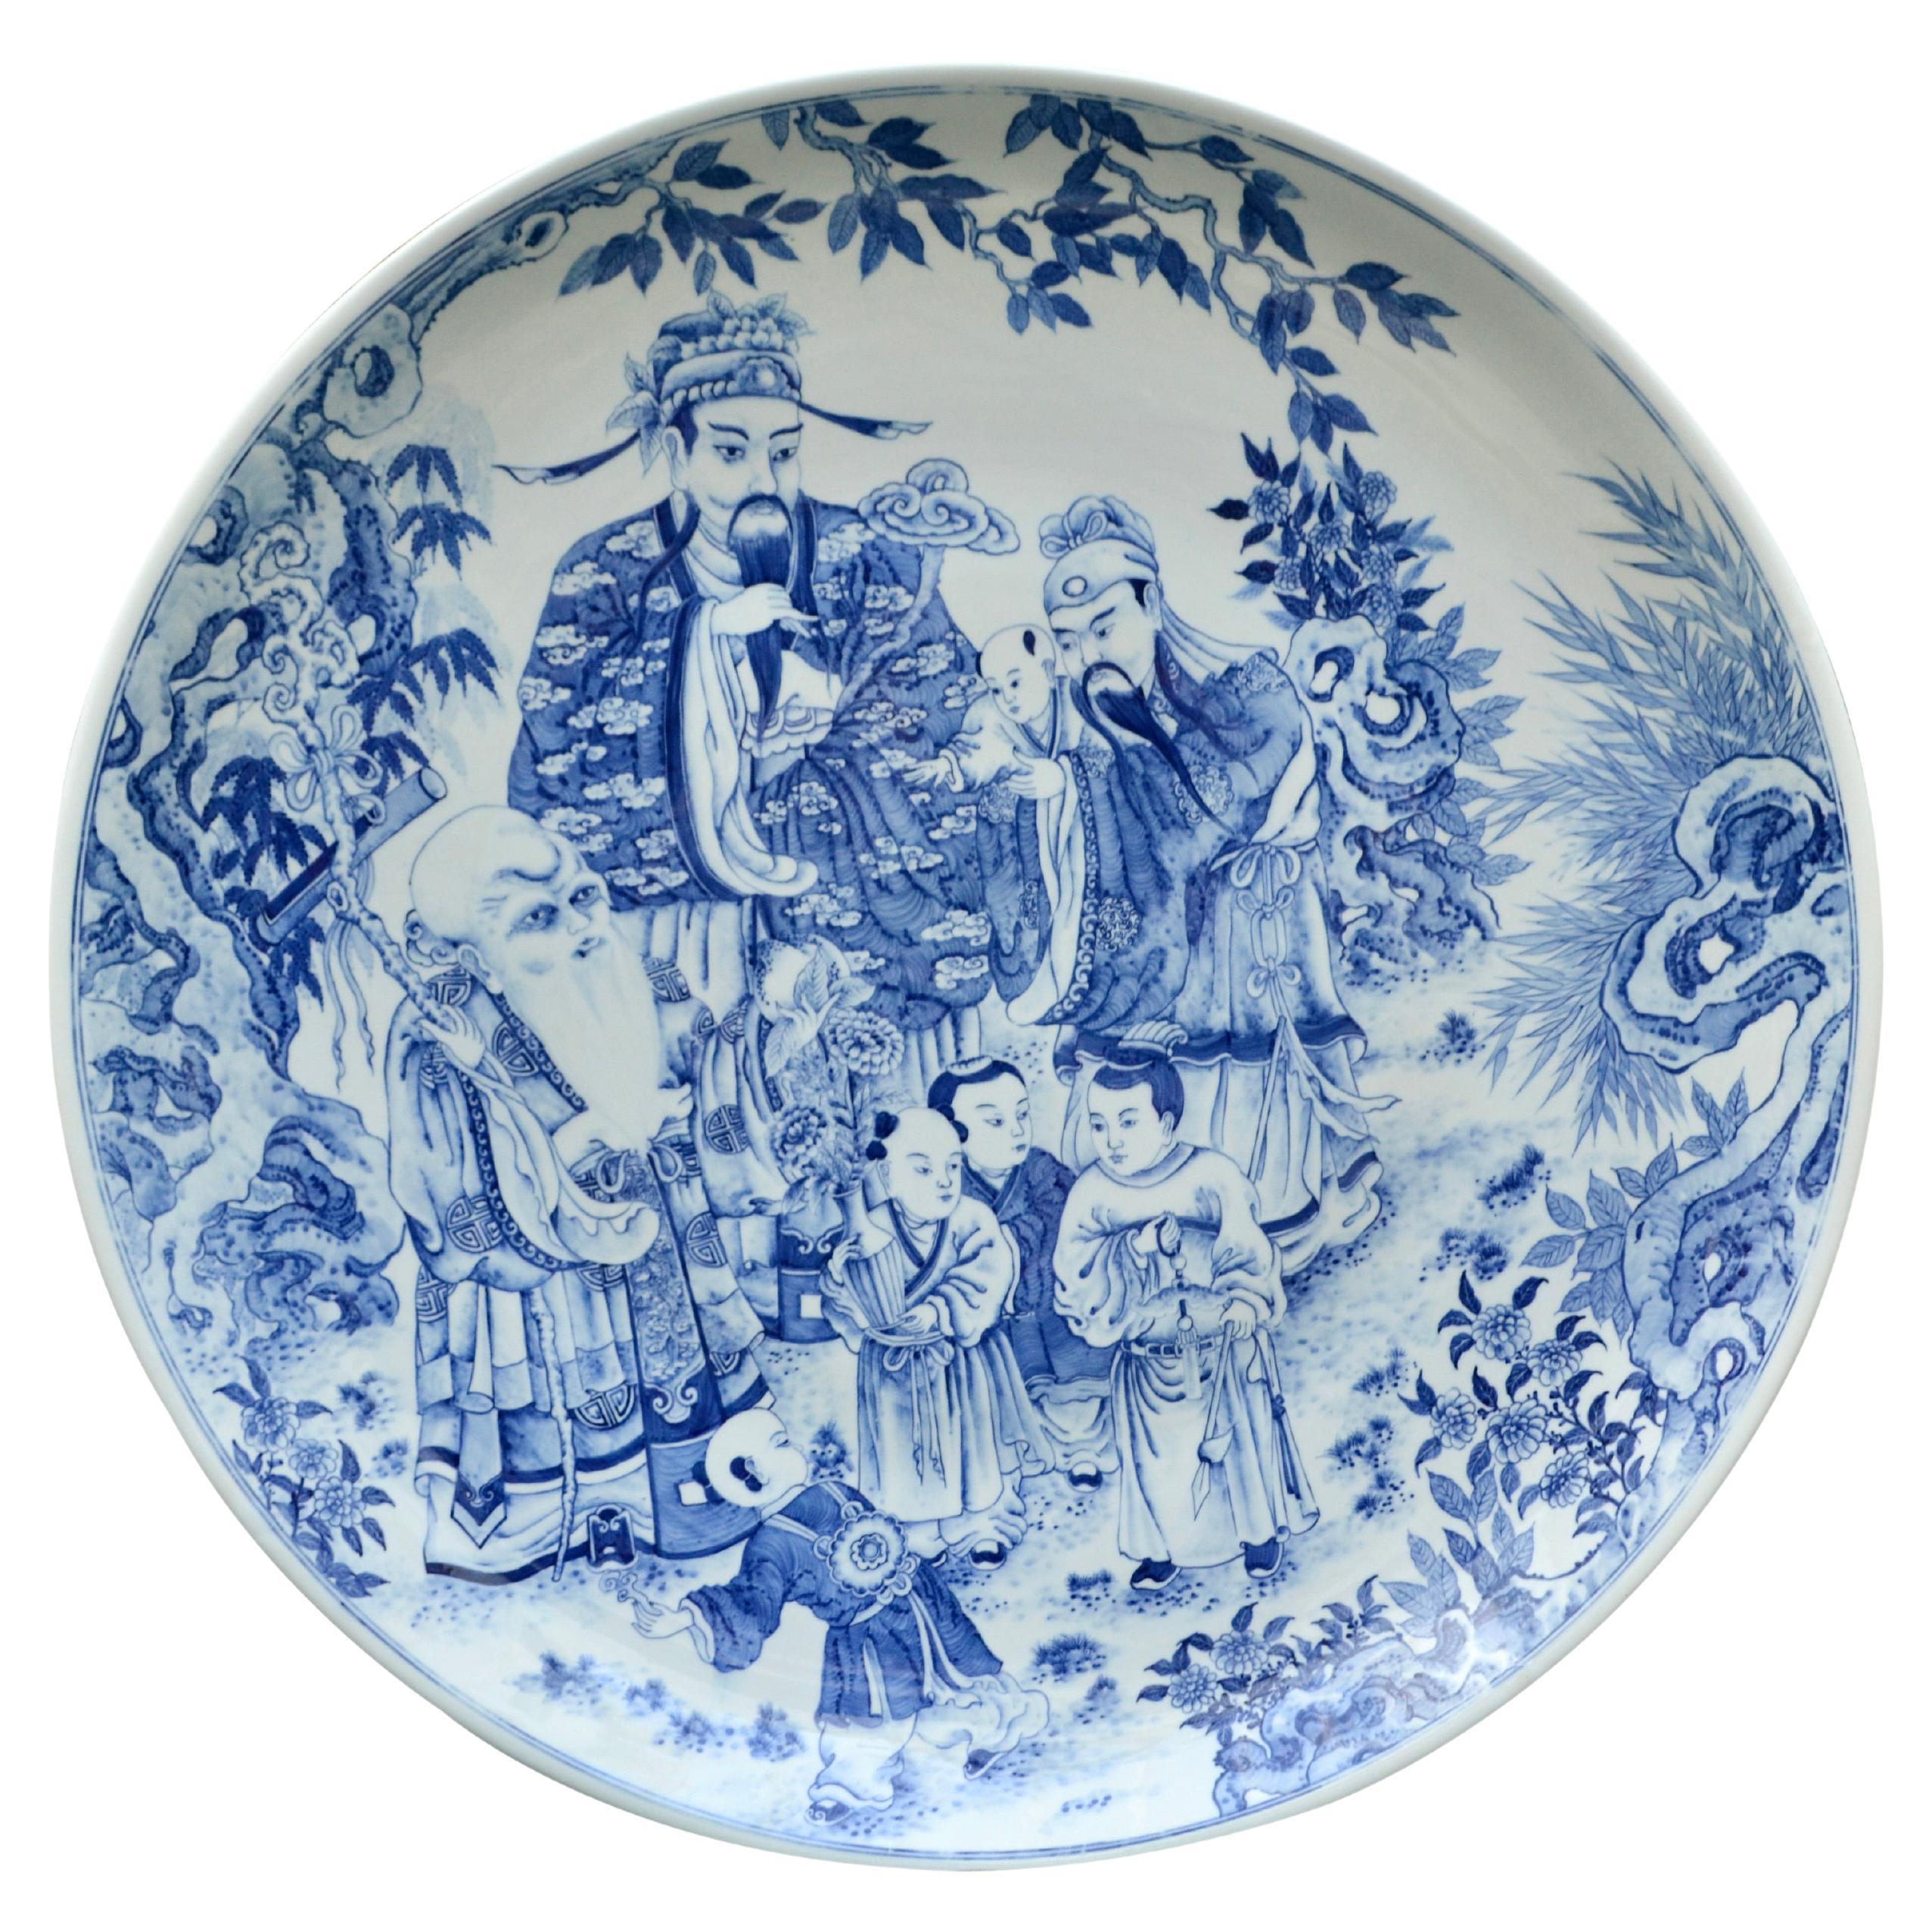 Large Blue and White Chinese Charger Depicting the Gods Fu Lu and Shou